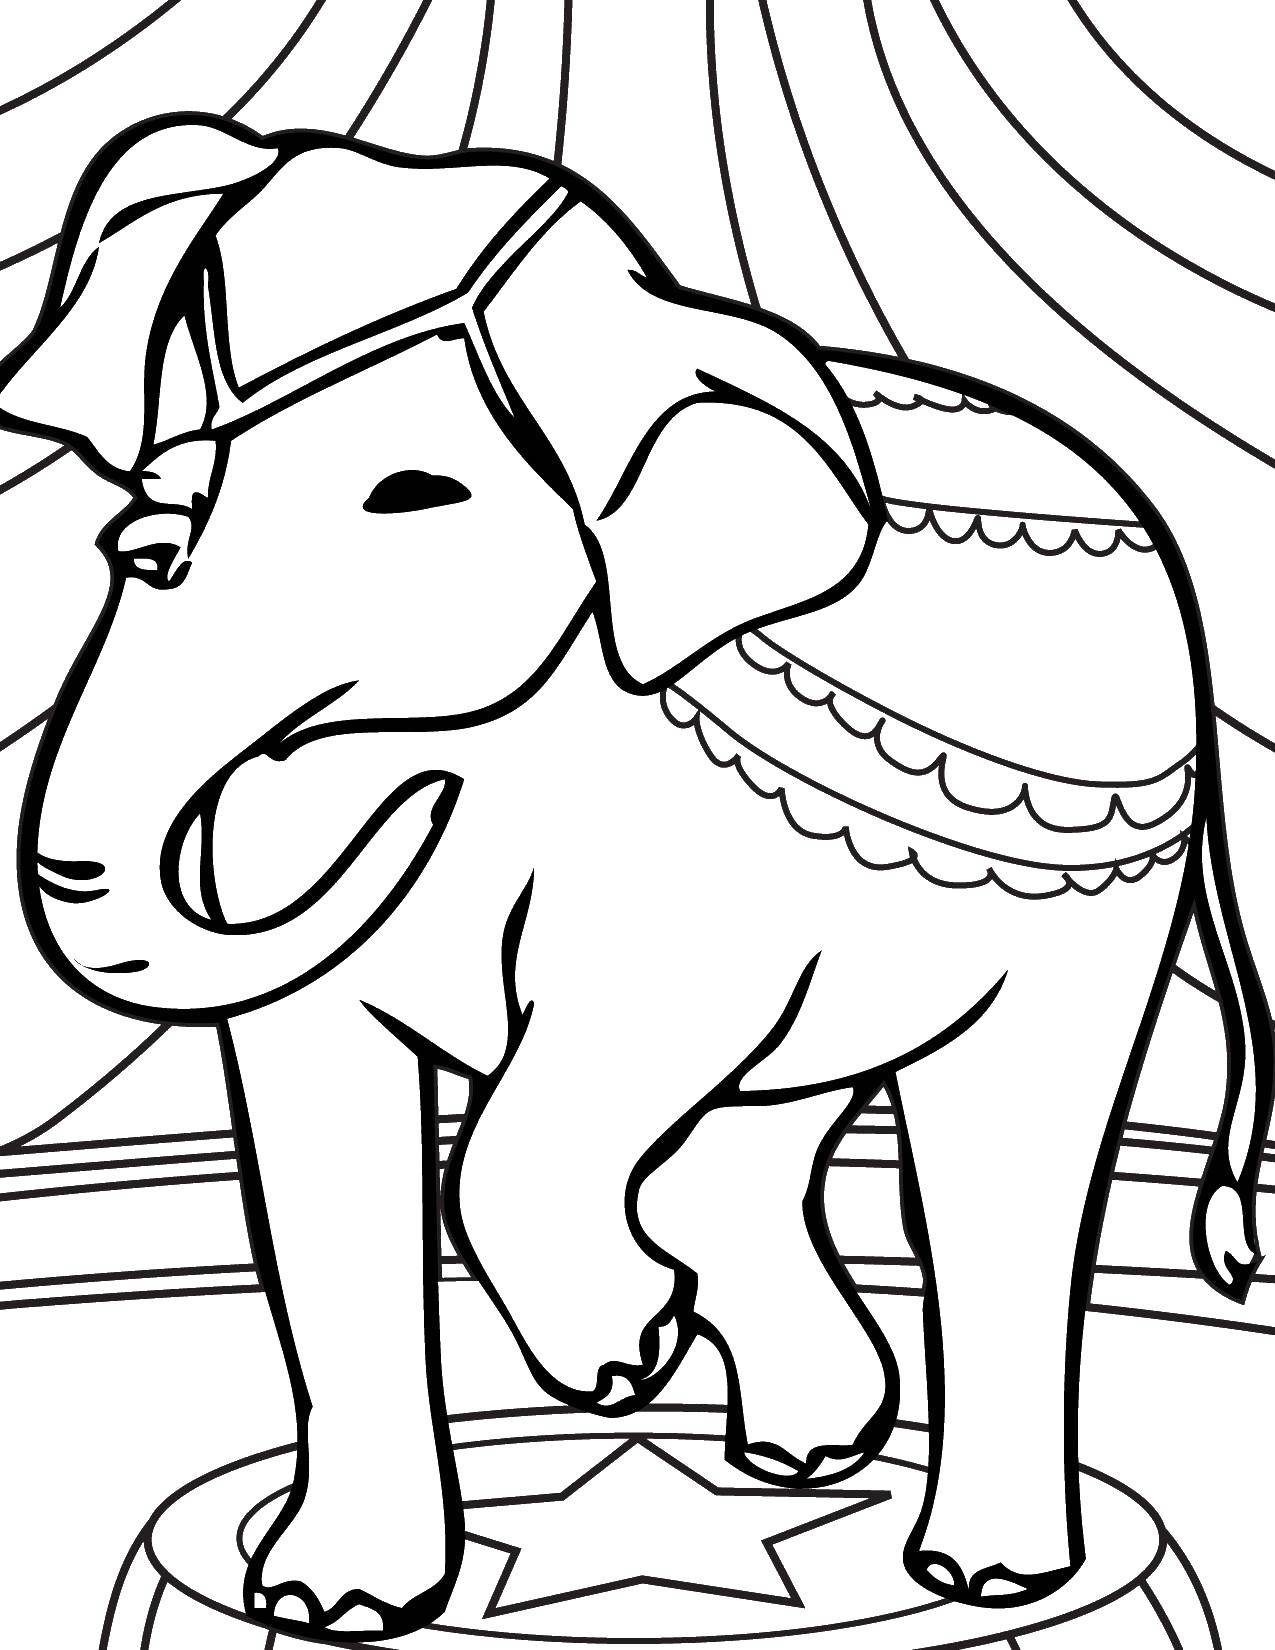 Coloring Circus layer. Category Animals. Tags:  circus. elephant.